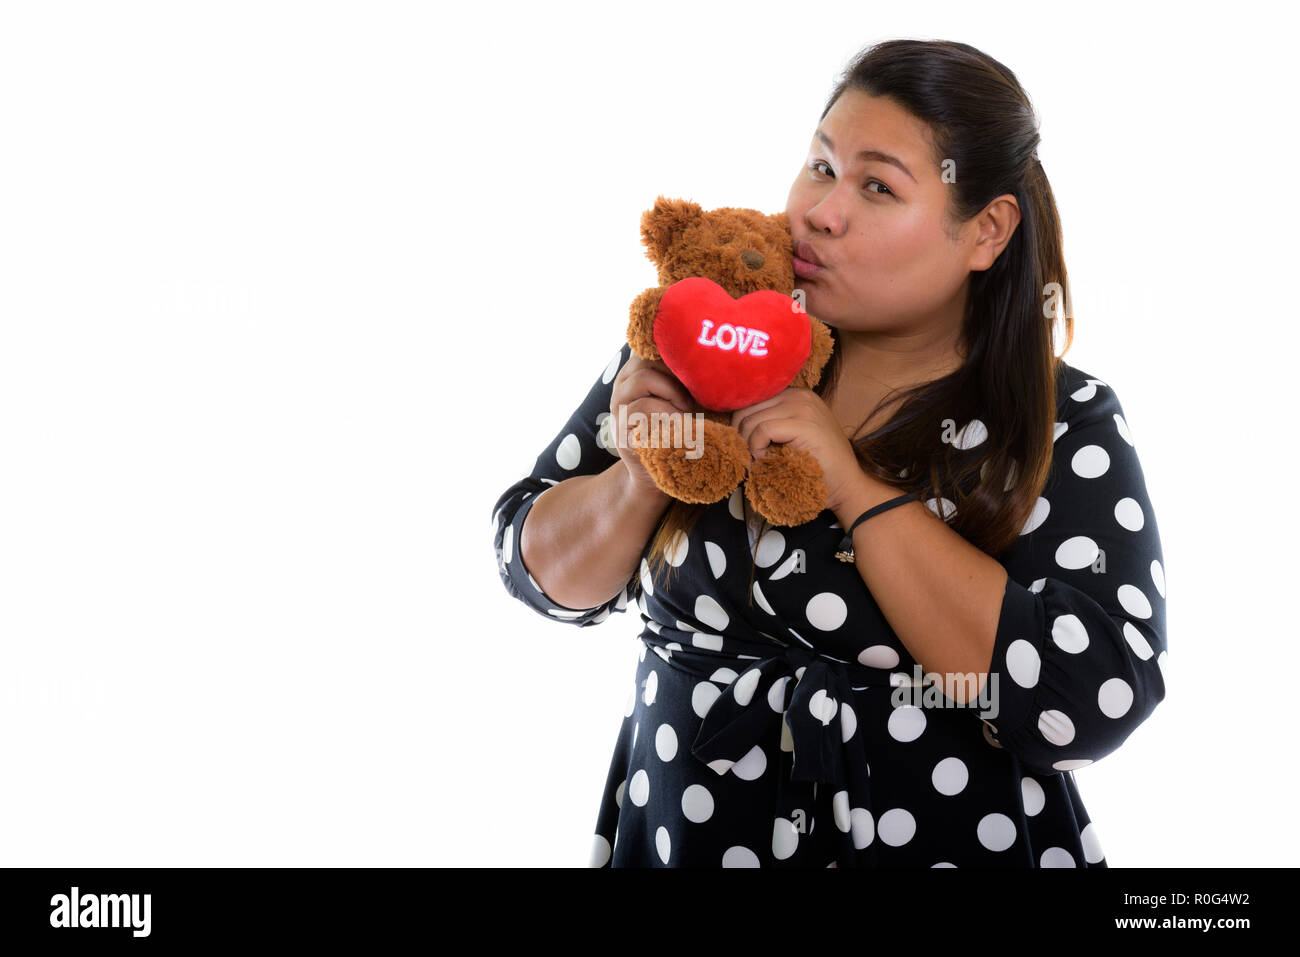 Studio shot of young fat Asian woman holding and kissing teddy b Stock Photo